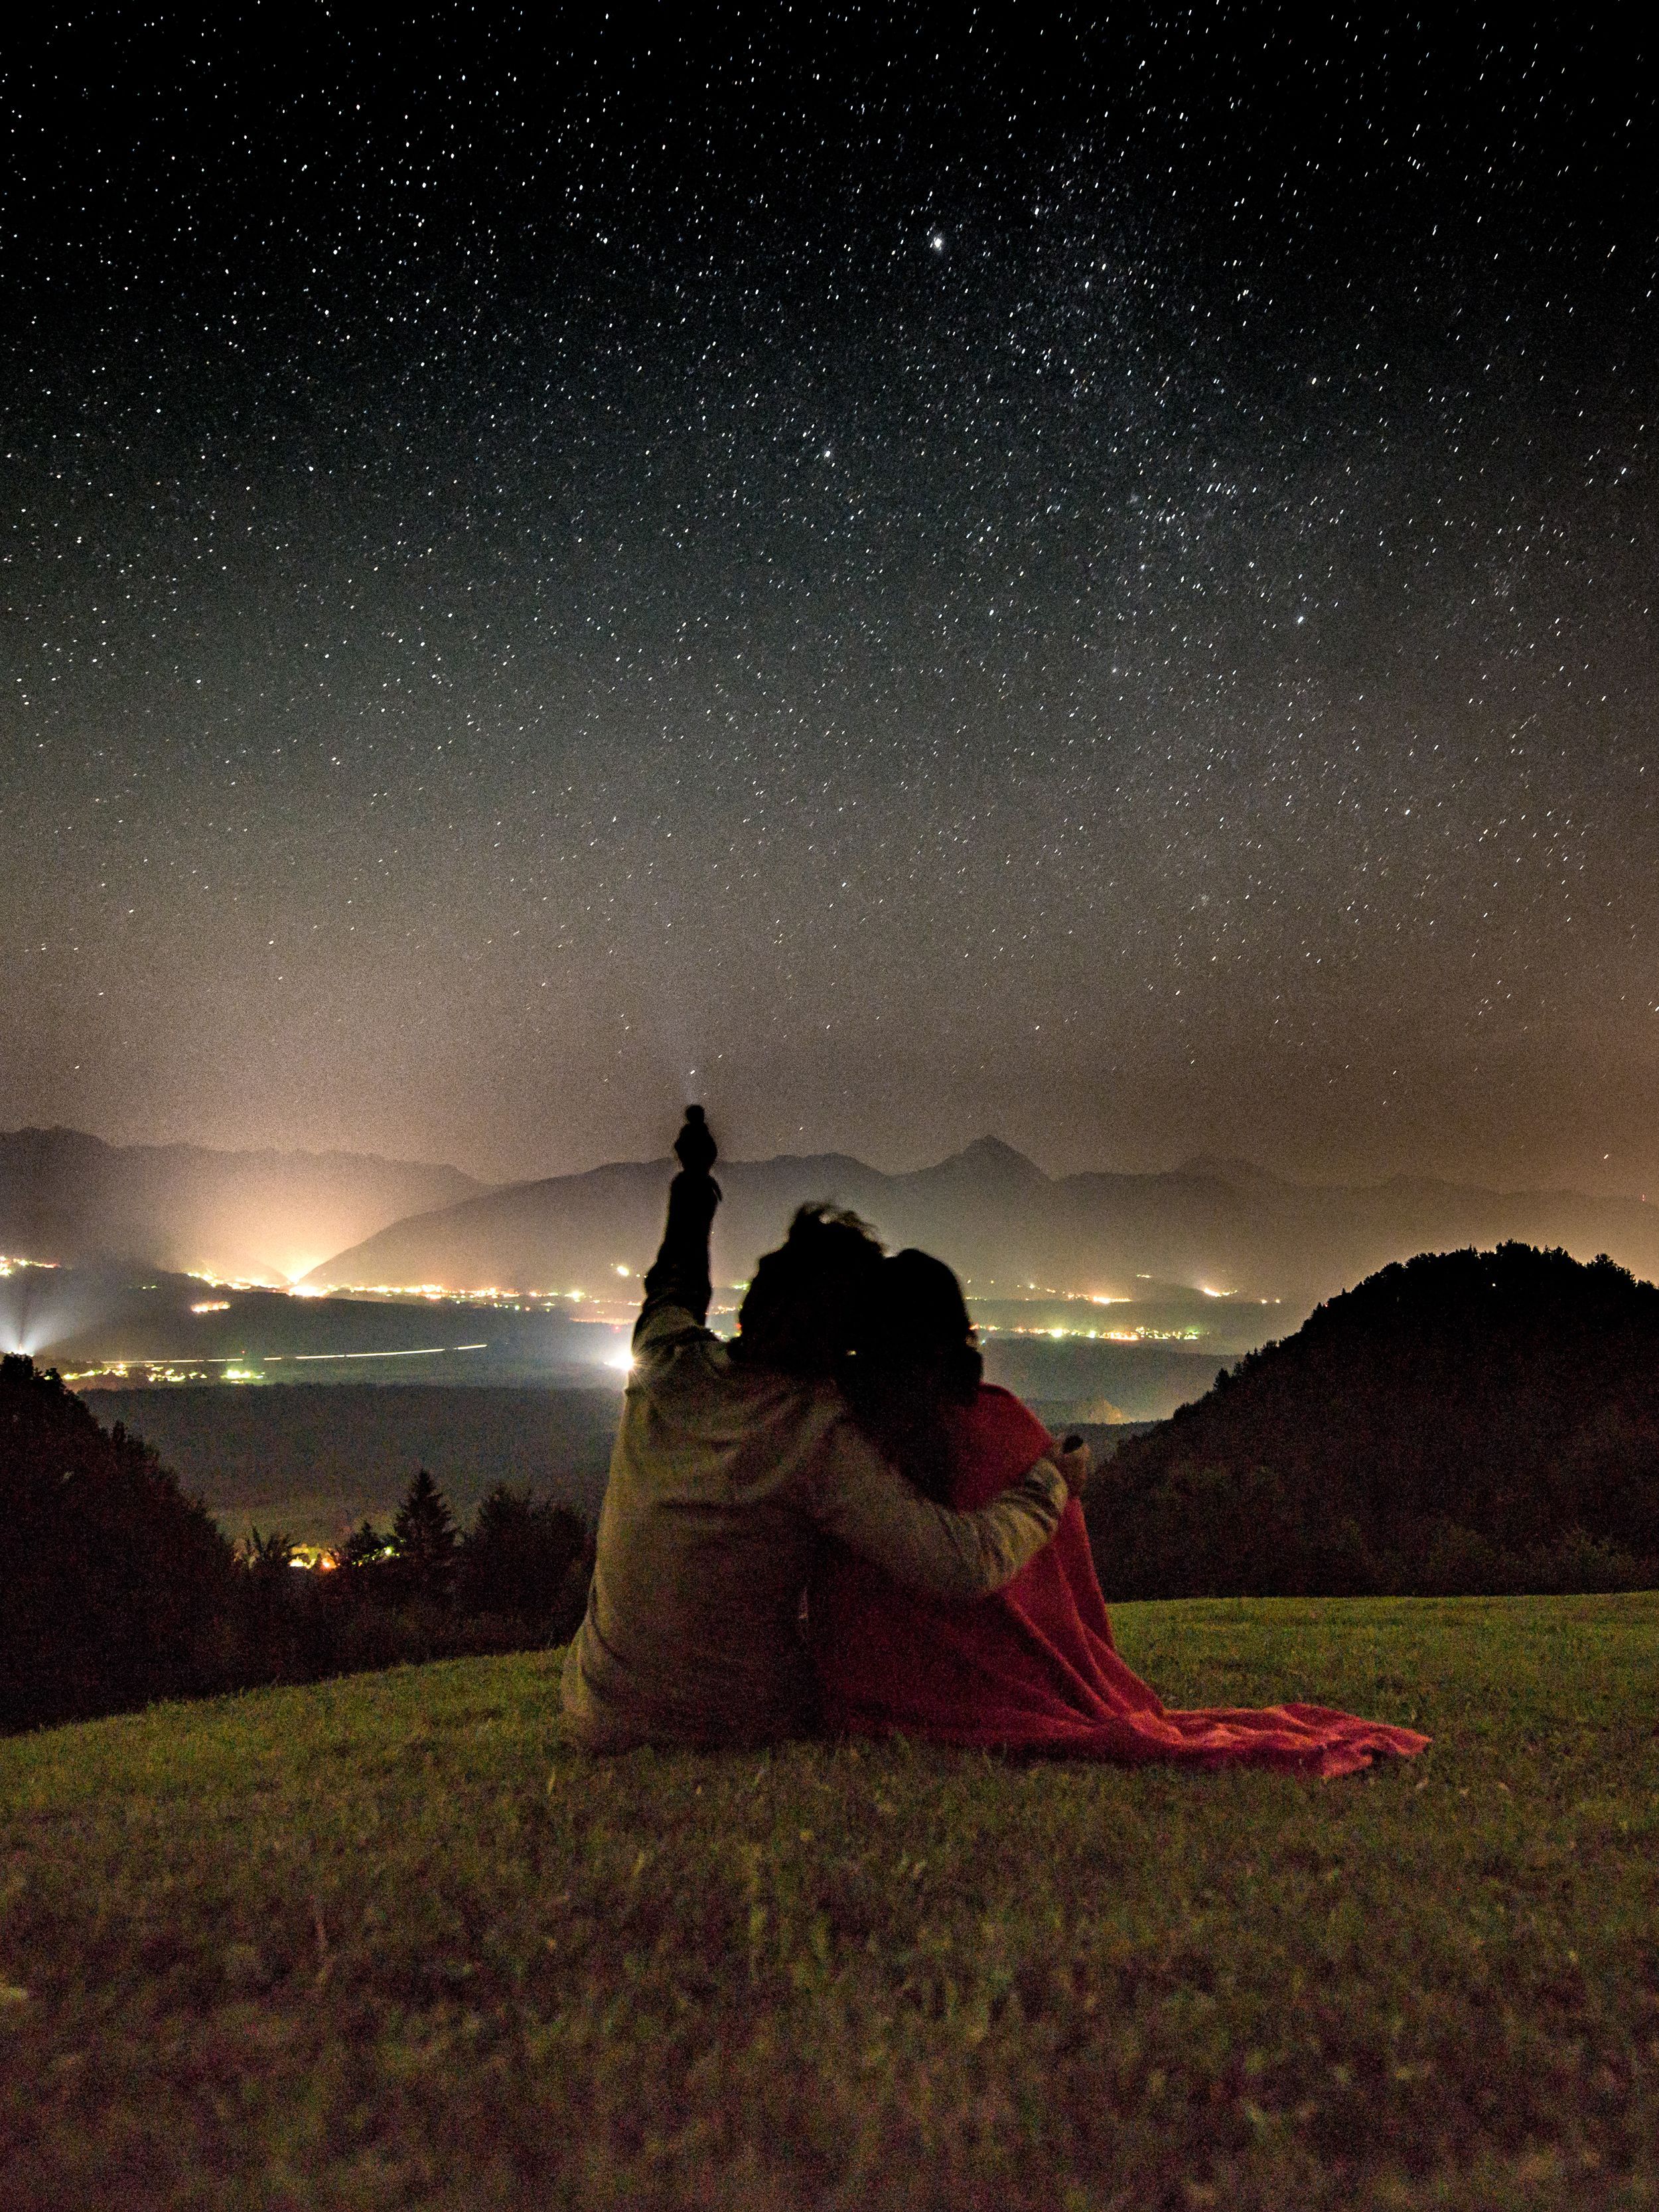 Non Cliché Second Date Ideas That Are Better Than Dinner And A Movie. Cute Date Ideas, Dream Dates, Stargazing